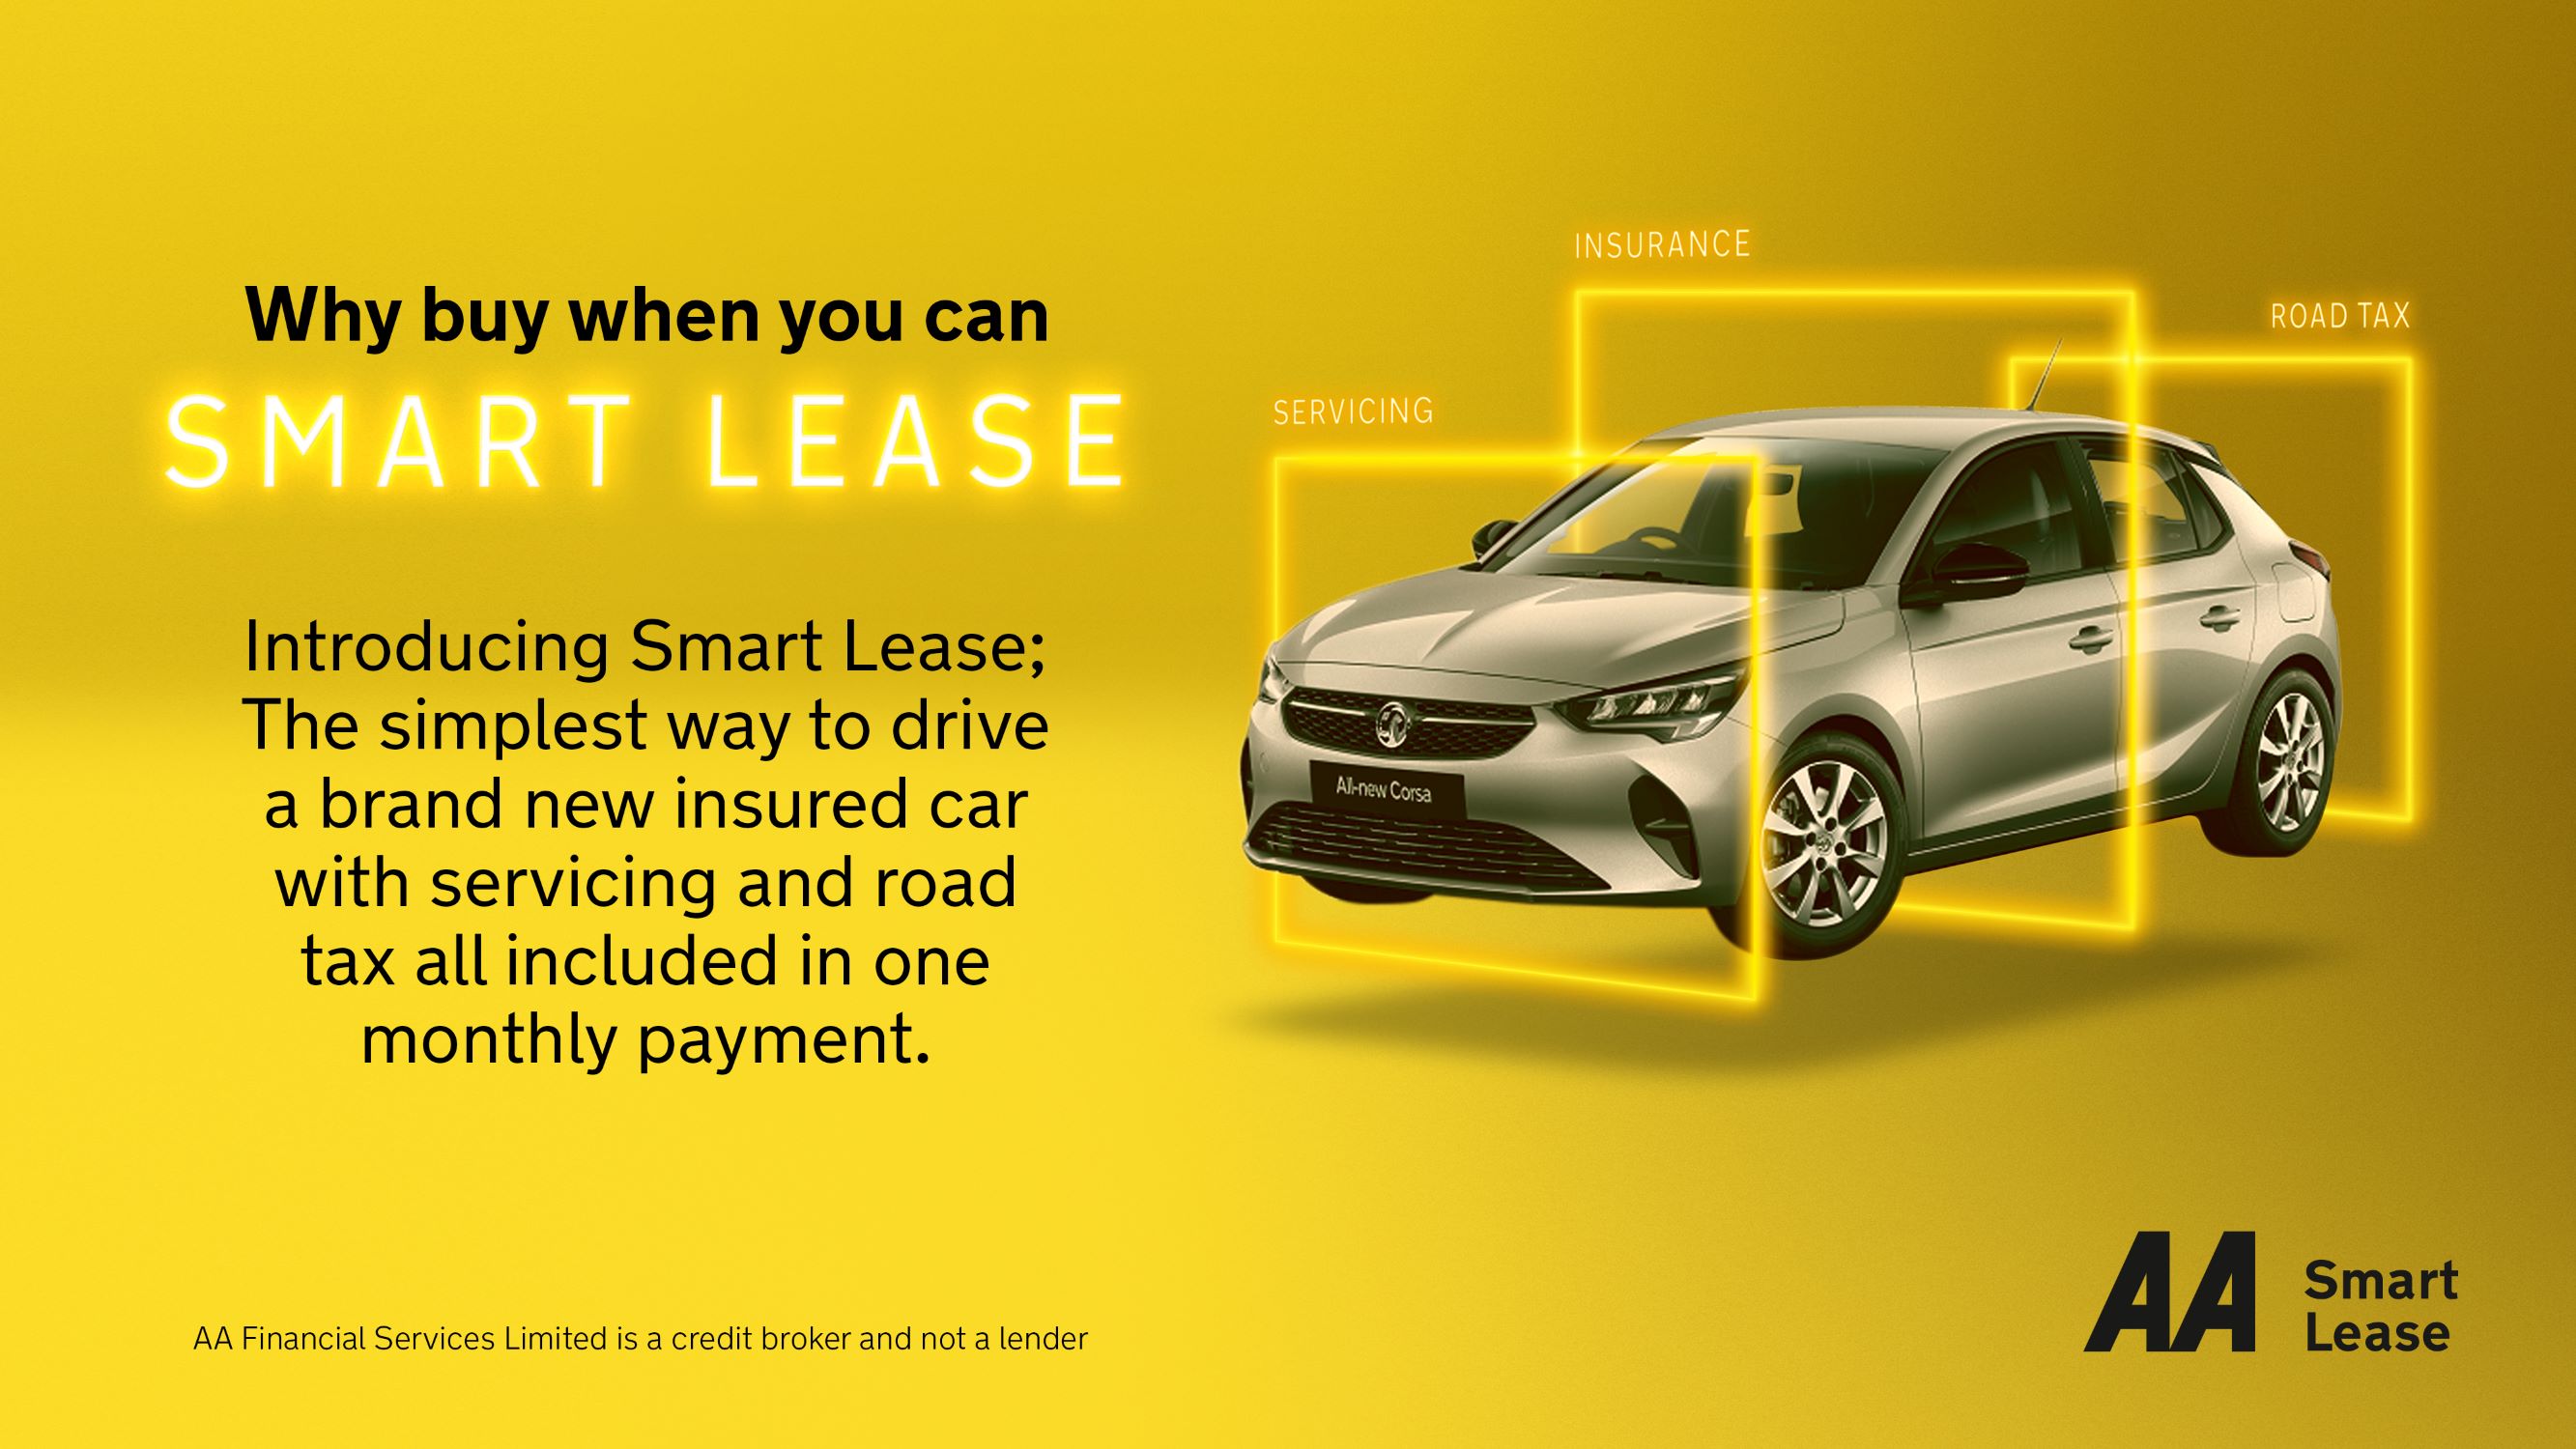 The aa smart lease visual powerpoint v 2 resize